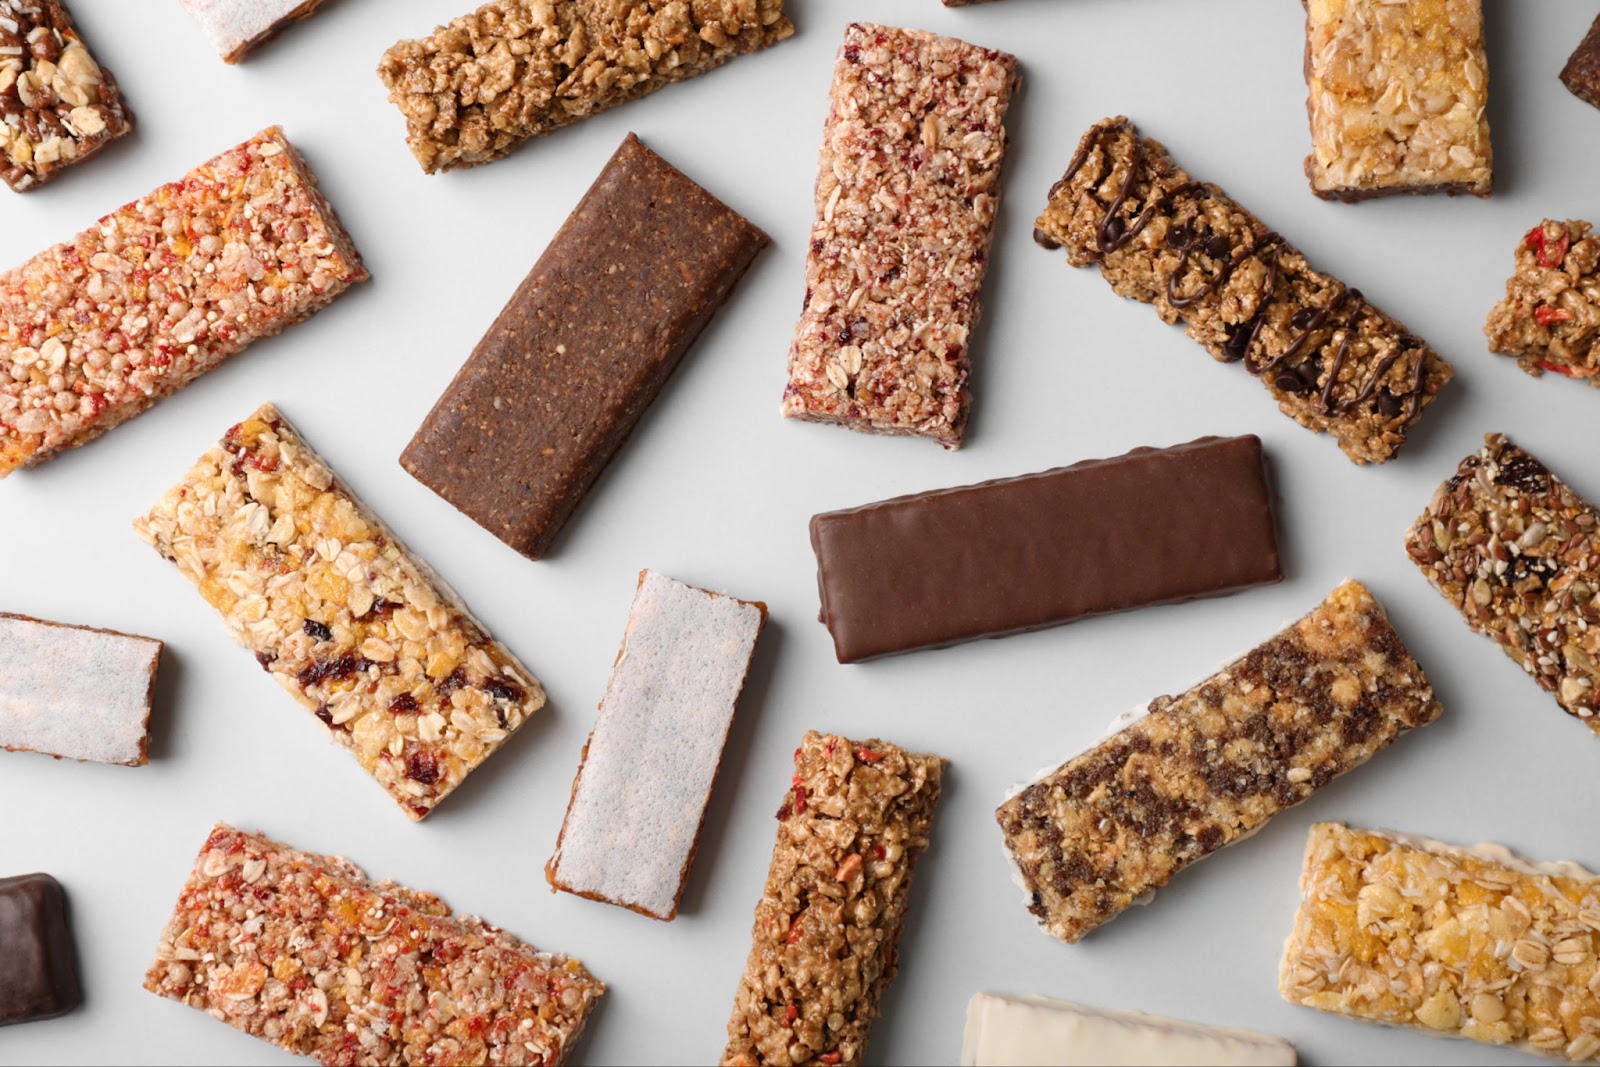 group of different protein bars